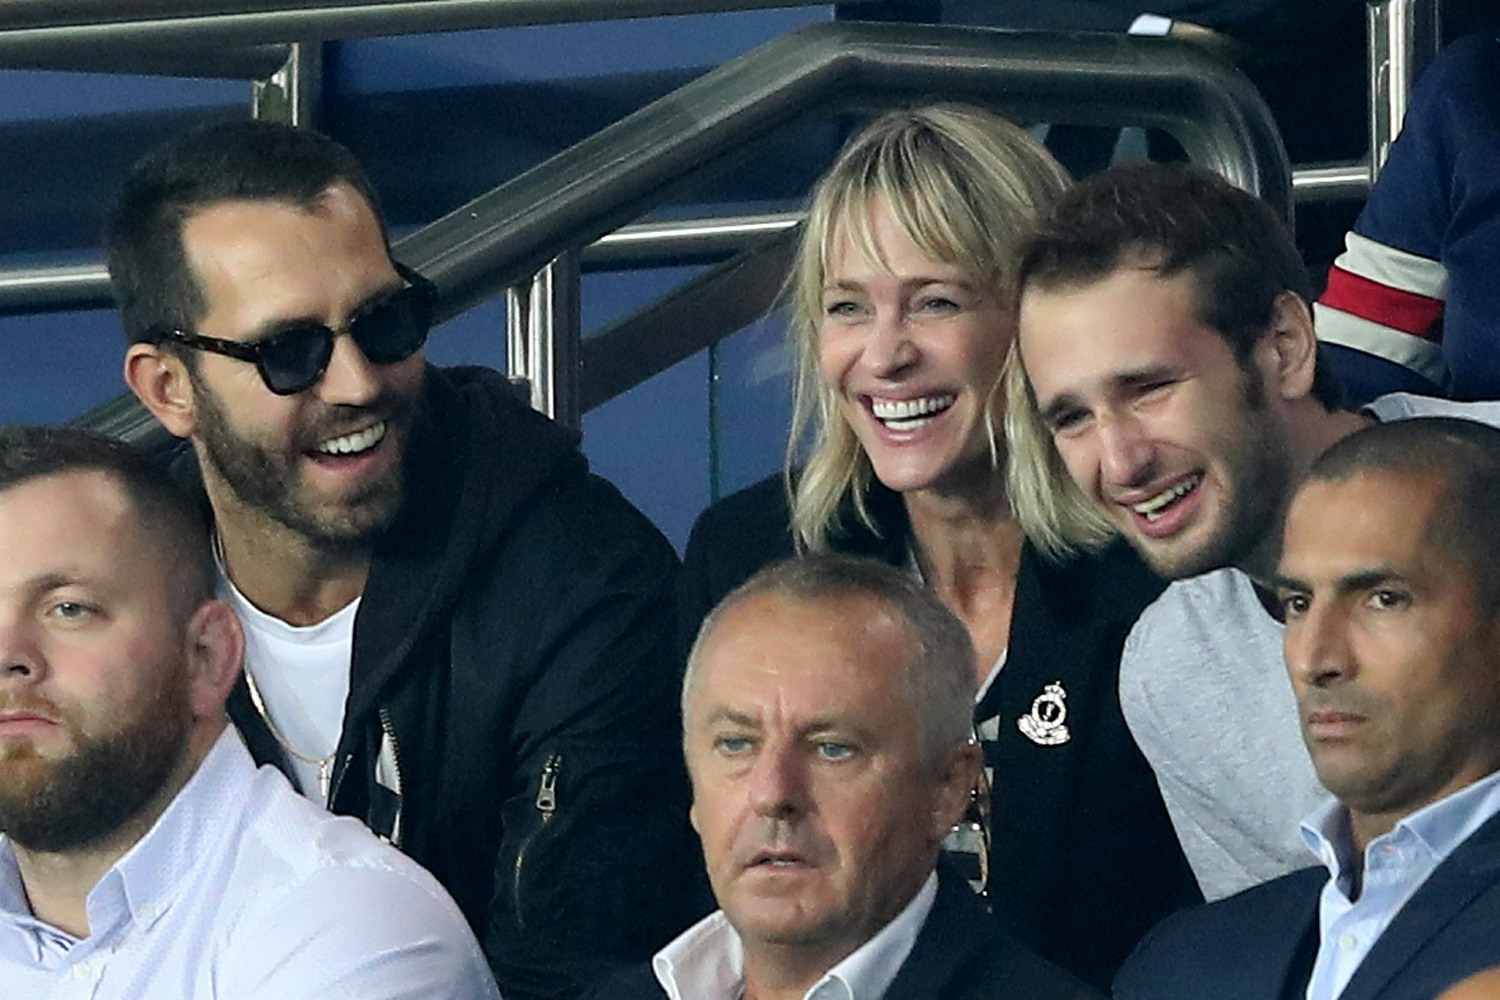 Celebrities attend the Champions League match in Paris